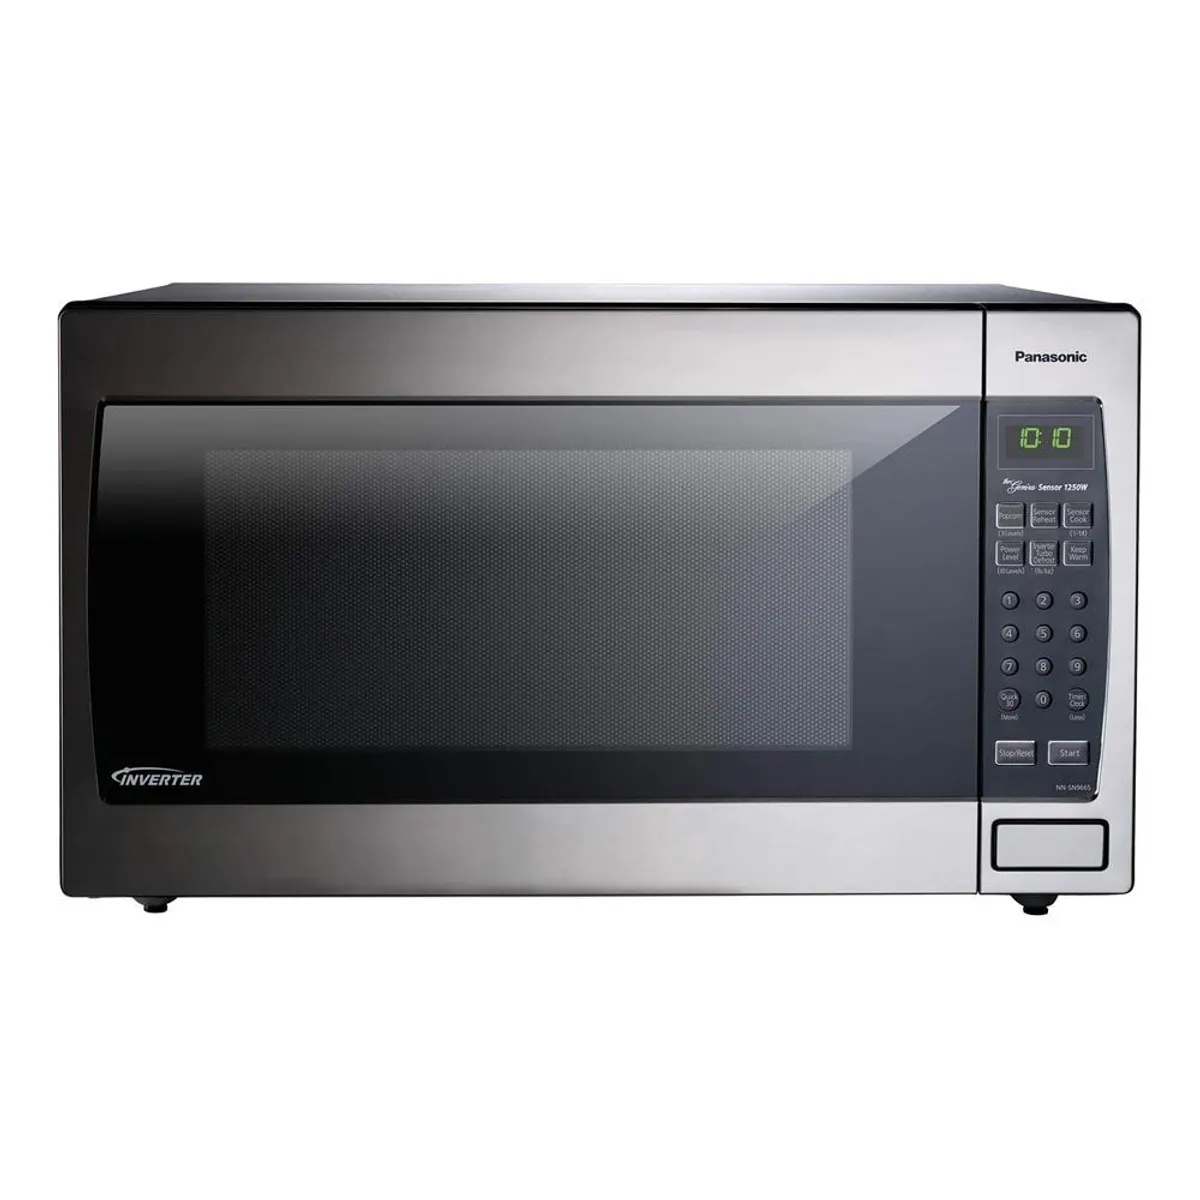 Panasonic Microwave Oven NN-SN966S Stainless Steel Countertop/Built-In